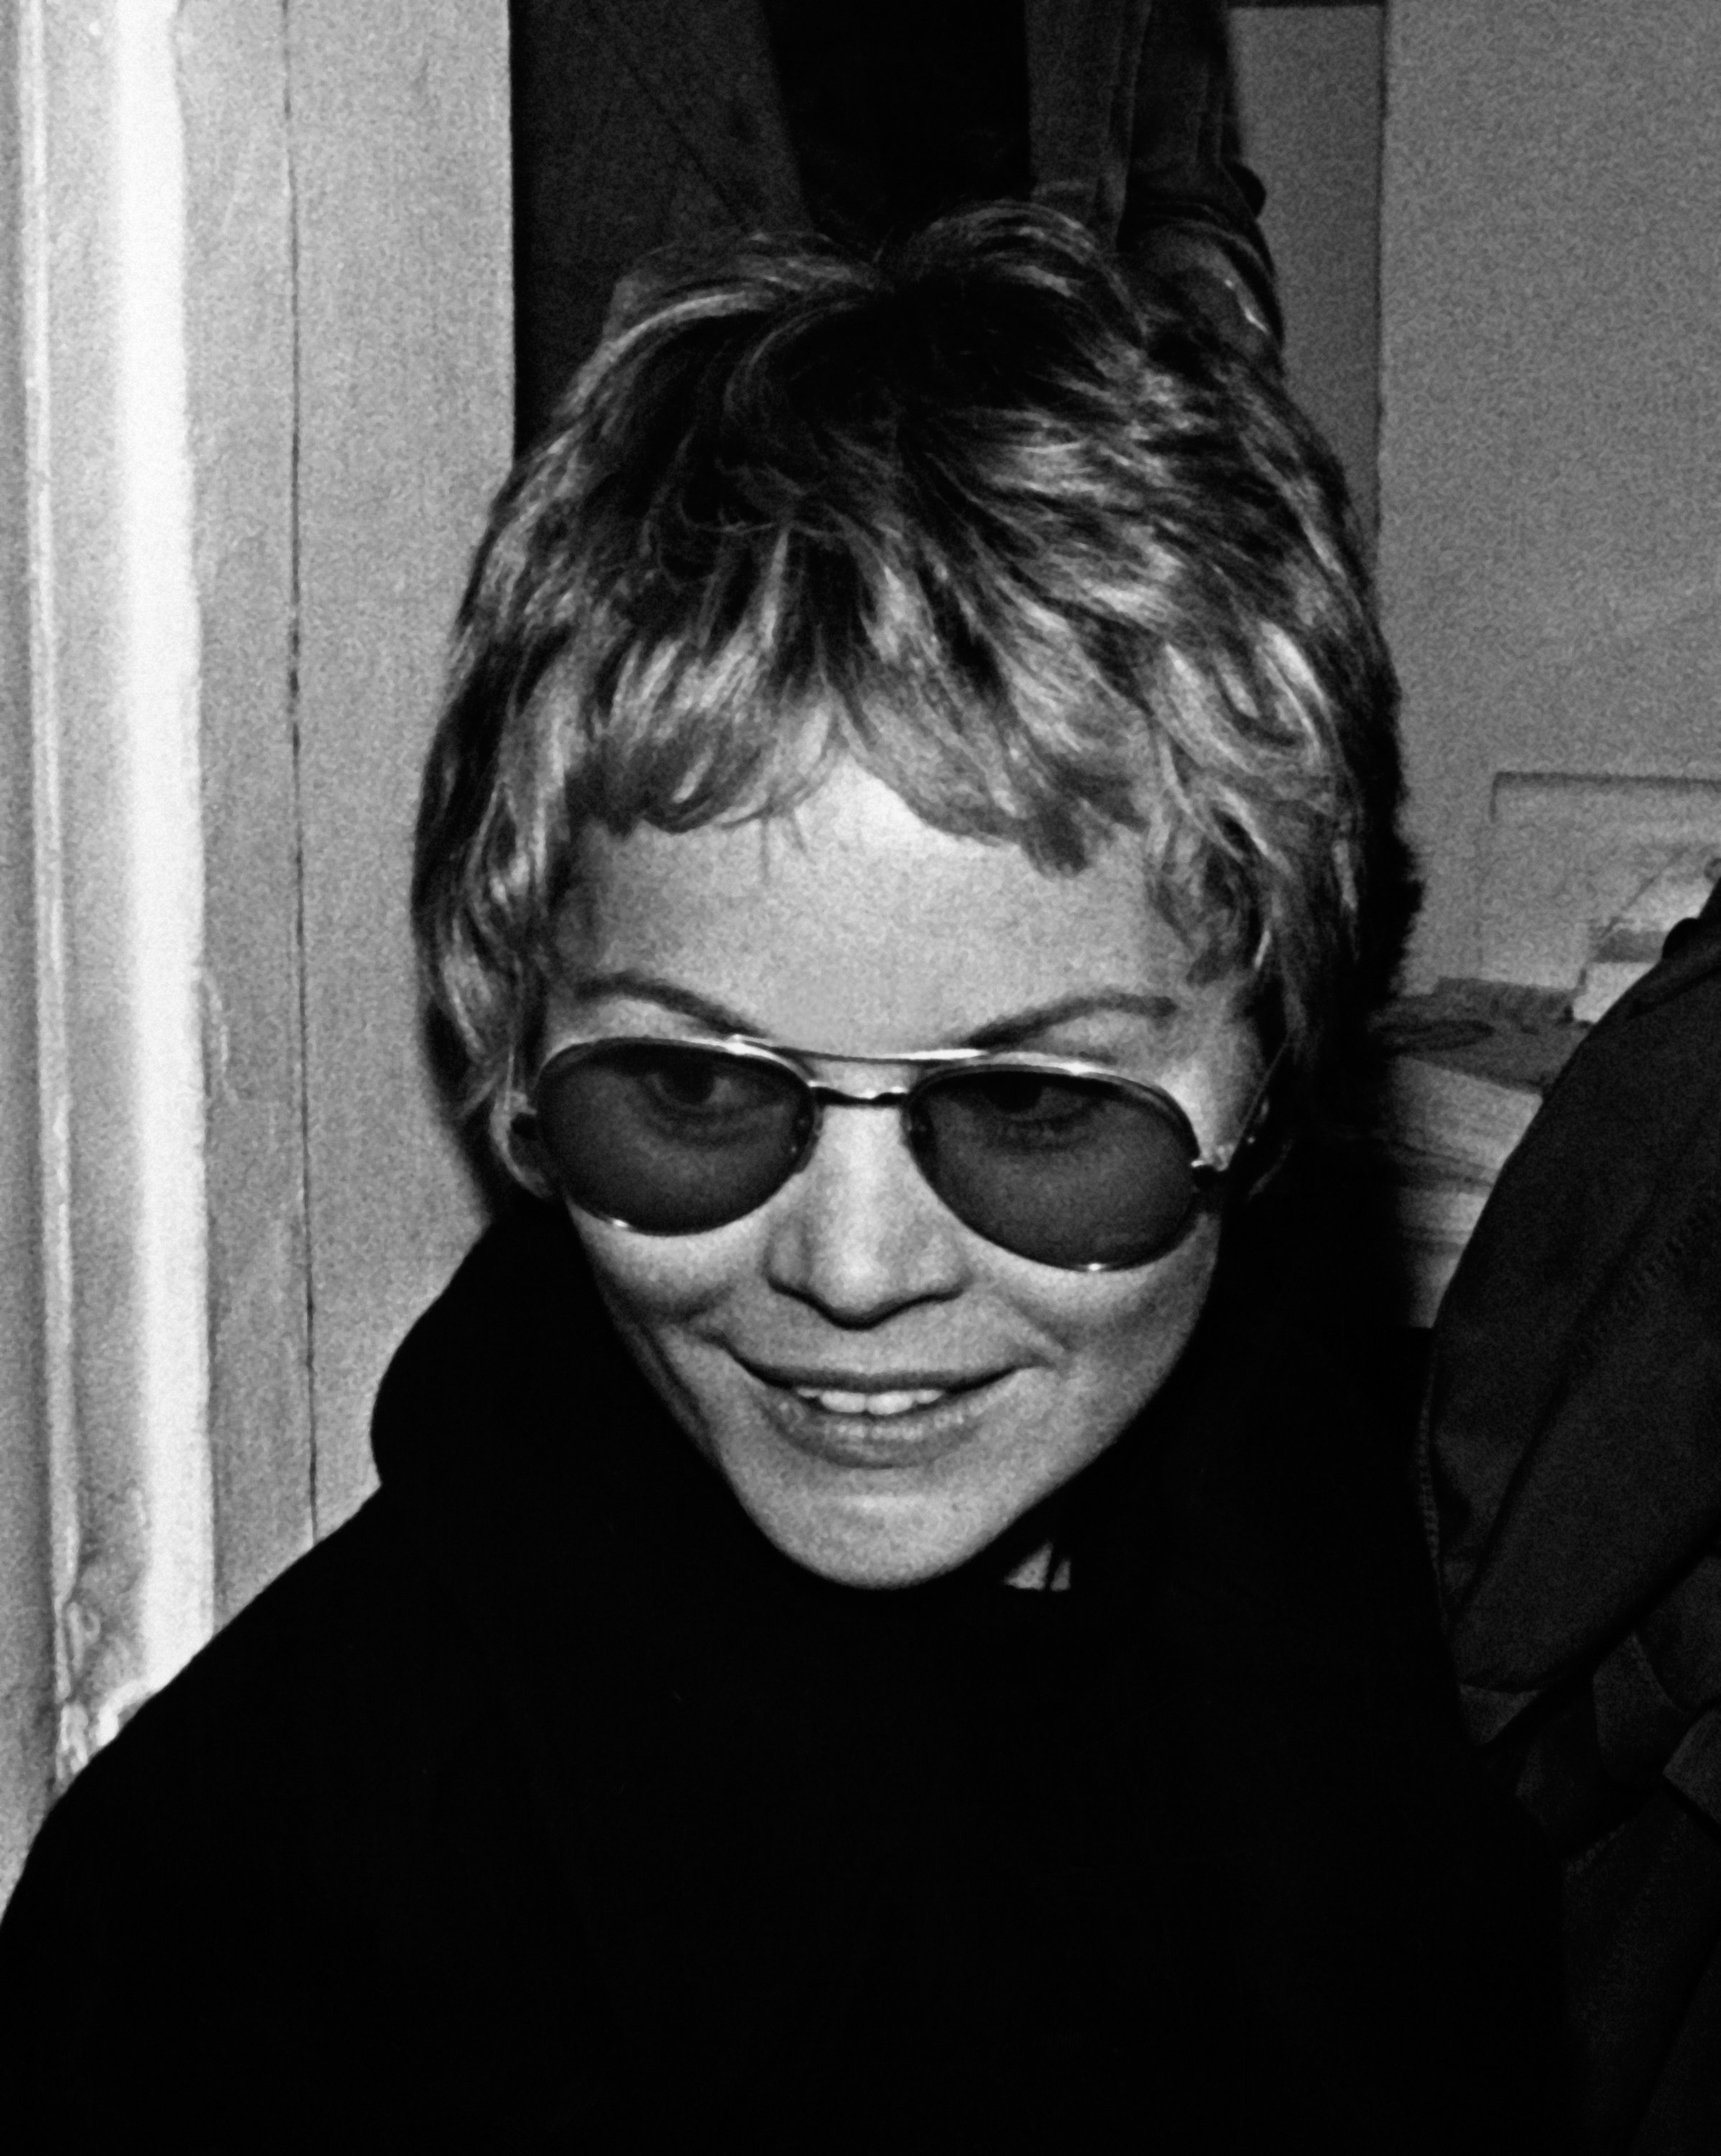 Tuesday Weld at the Plymouth Theater in New York City on January 29, 1974. | Source: Getty Images